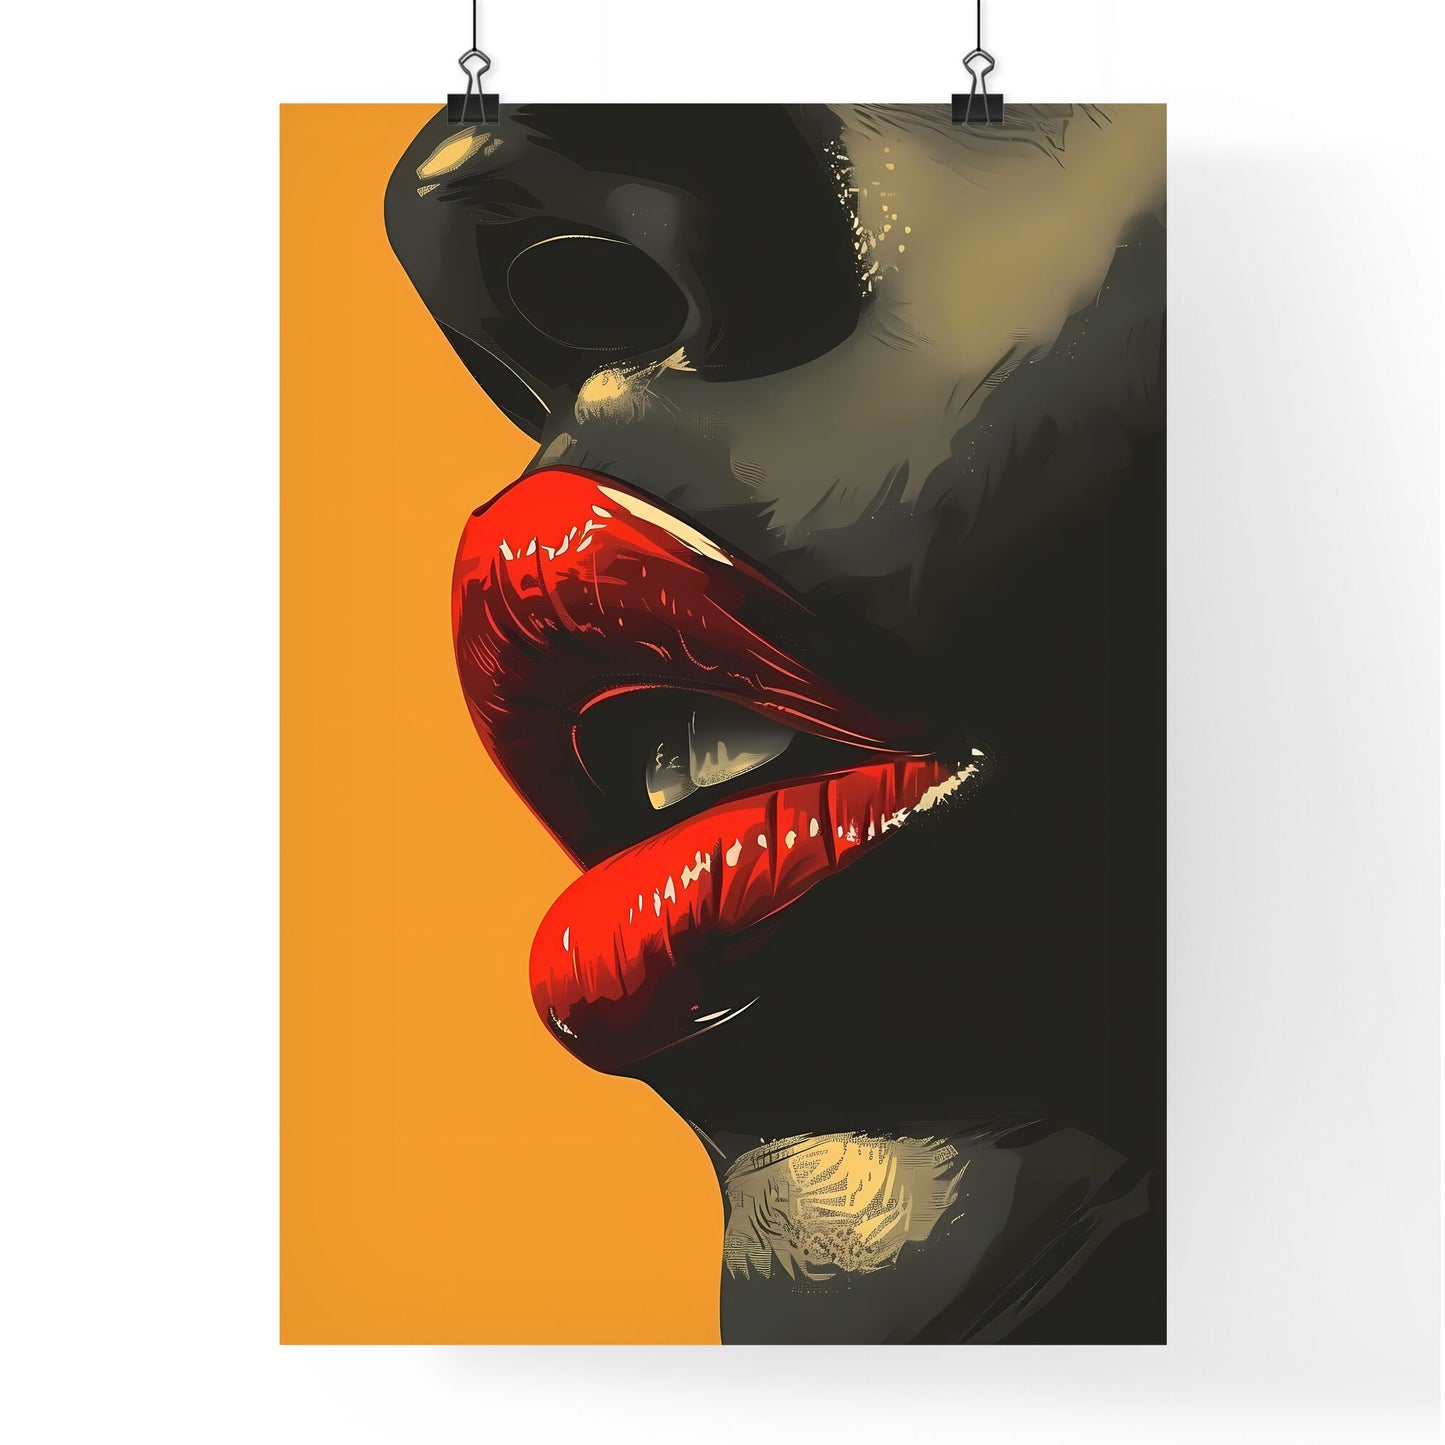 Vibrant Retro Poster: Proud, Strong Woman with Extraordinary Artistic Expression - Colorful Painting of a Slender, Young Black Girl Default Title